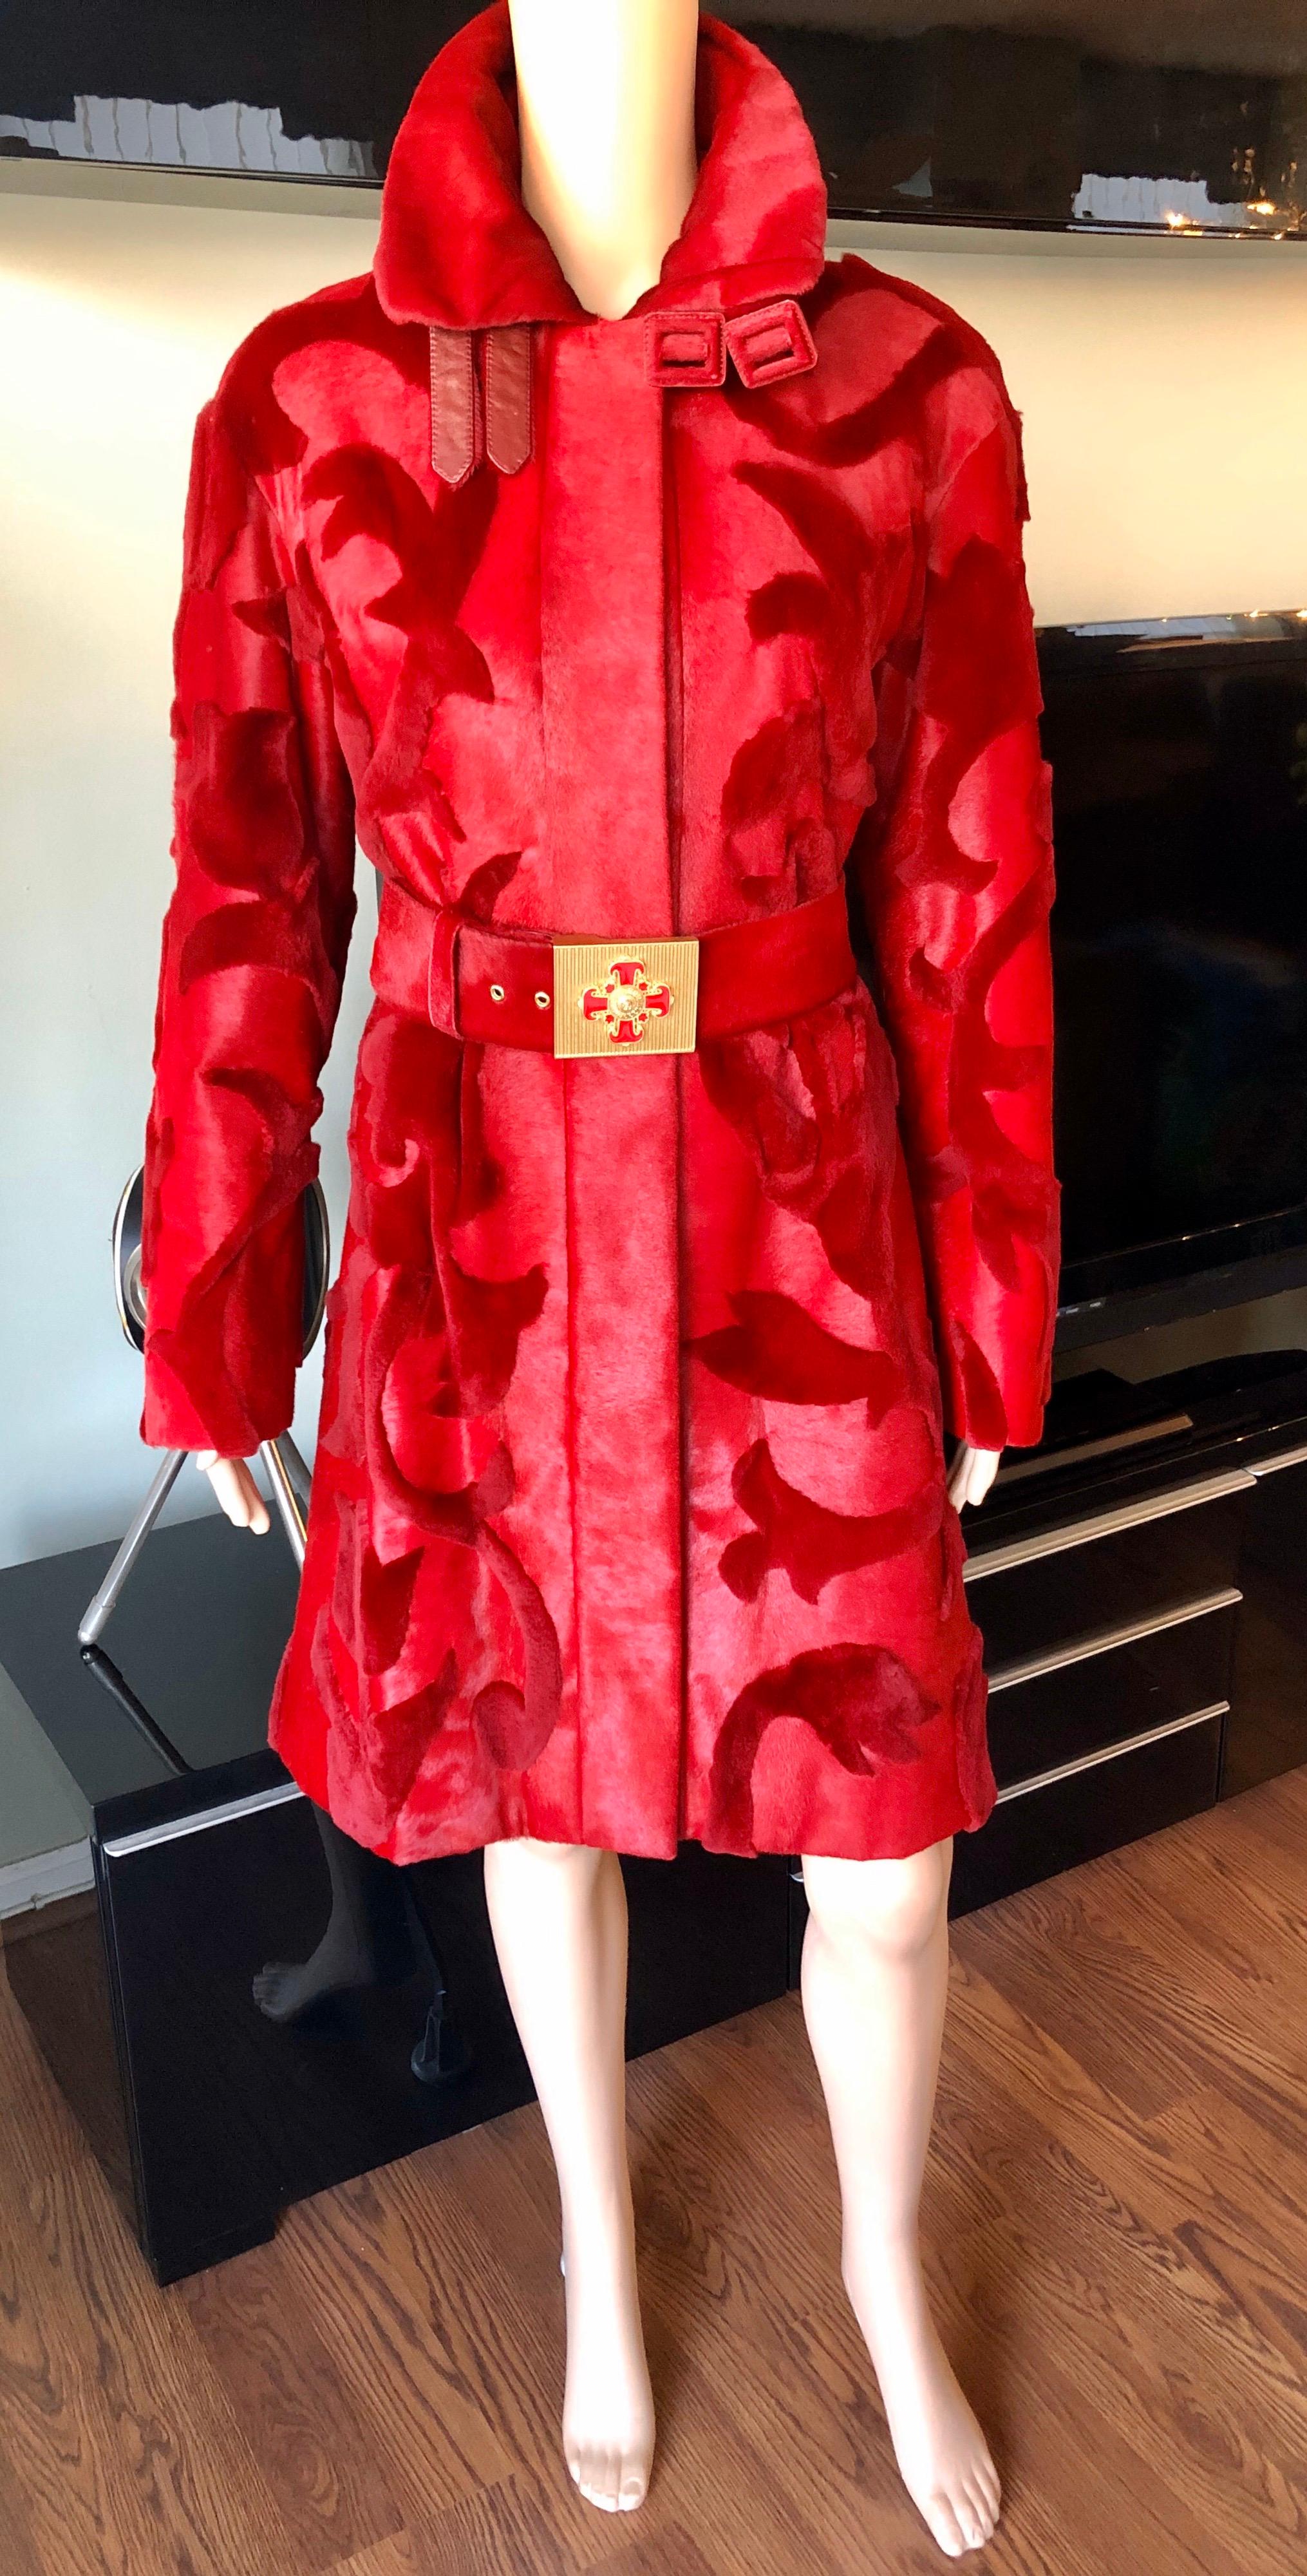 Versace Mink Fur and Leather Belted Knee-Length Red Jacket Coat IT 42

Versace mink fur and leather knee-length red coat featuring floral pattern throughout, stand collar with dual belt accents and pull-through buckle closures, removable belt with